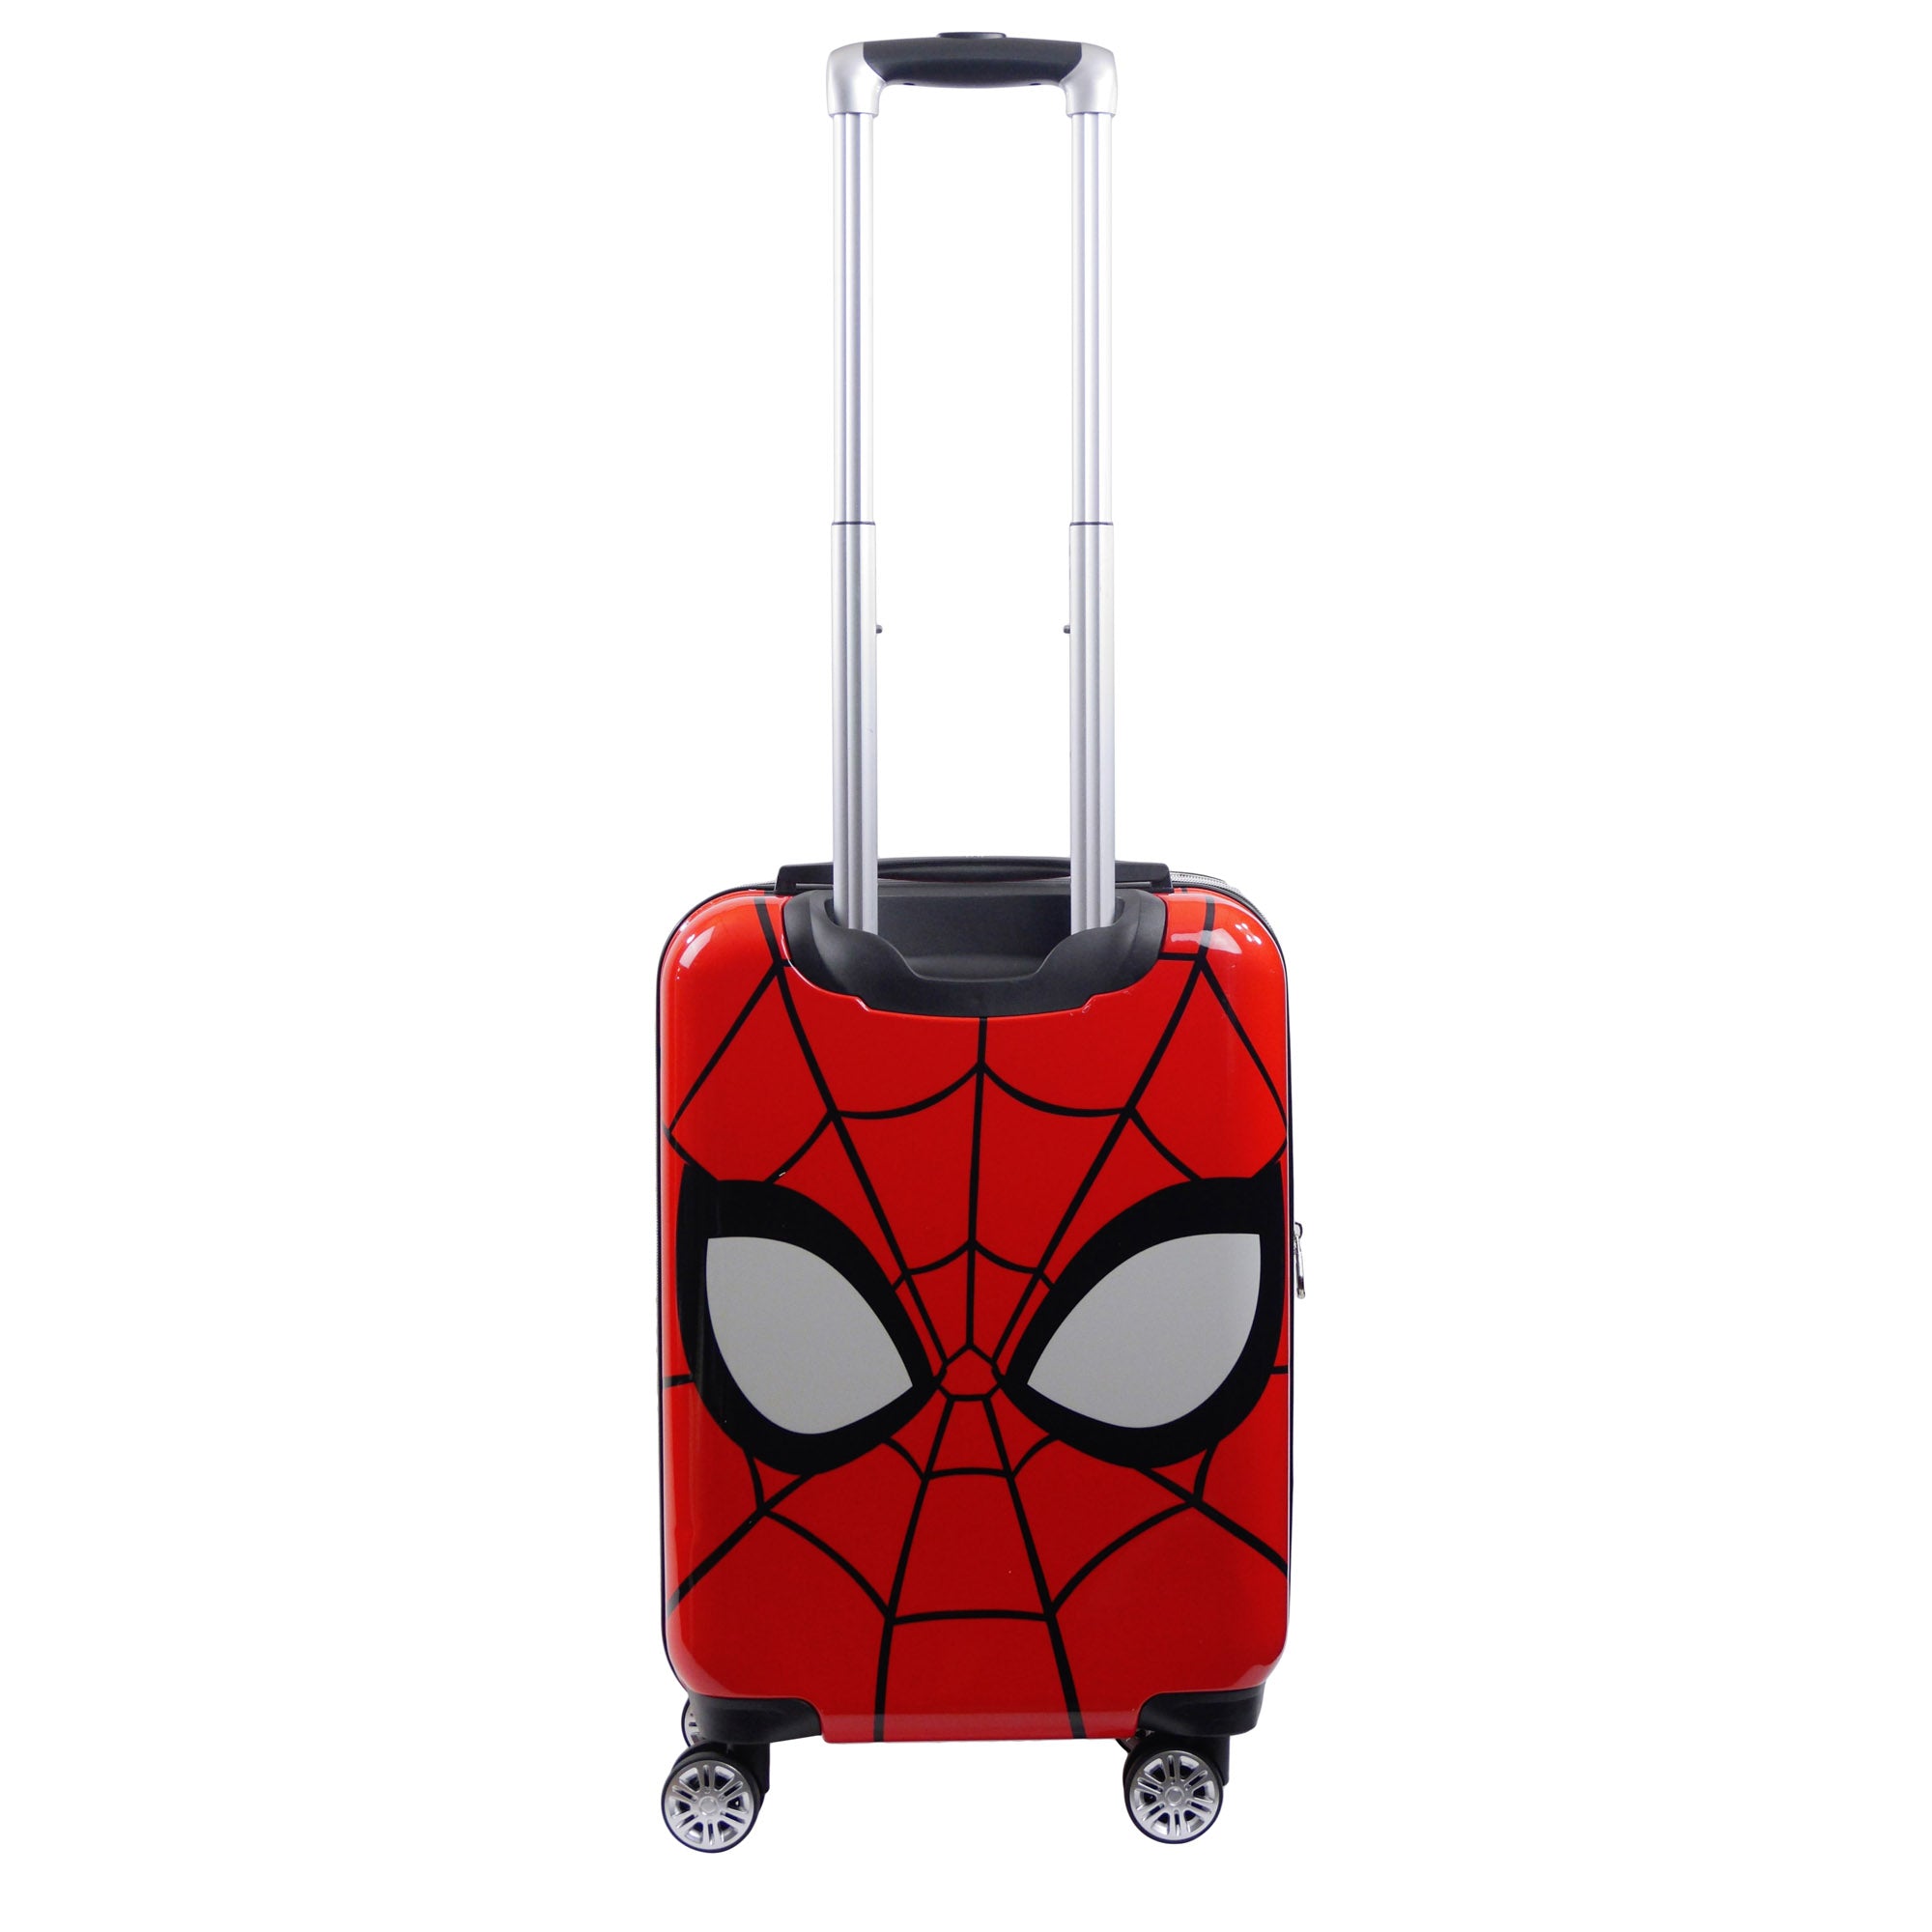 Marvel Spiderman Mask FŪL 21" Hard Rolling carry-on suitcase Luggage, Red with 2" zipper gusset for expandable space - best spinner suitcase for traveling